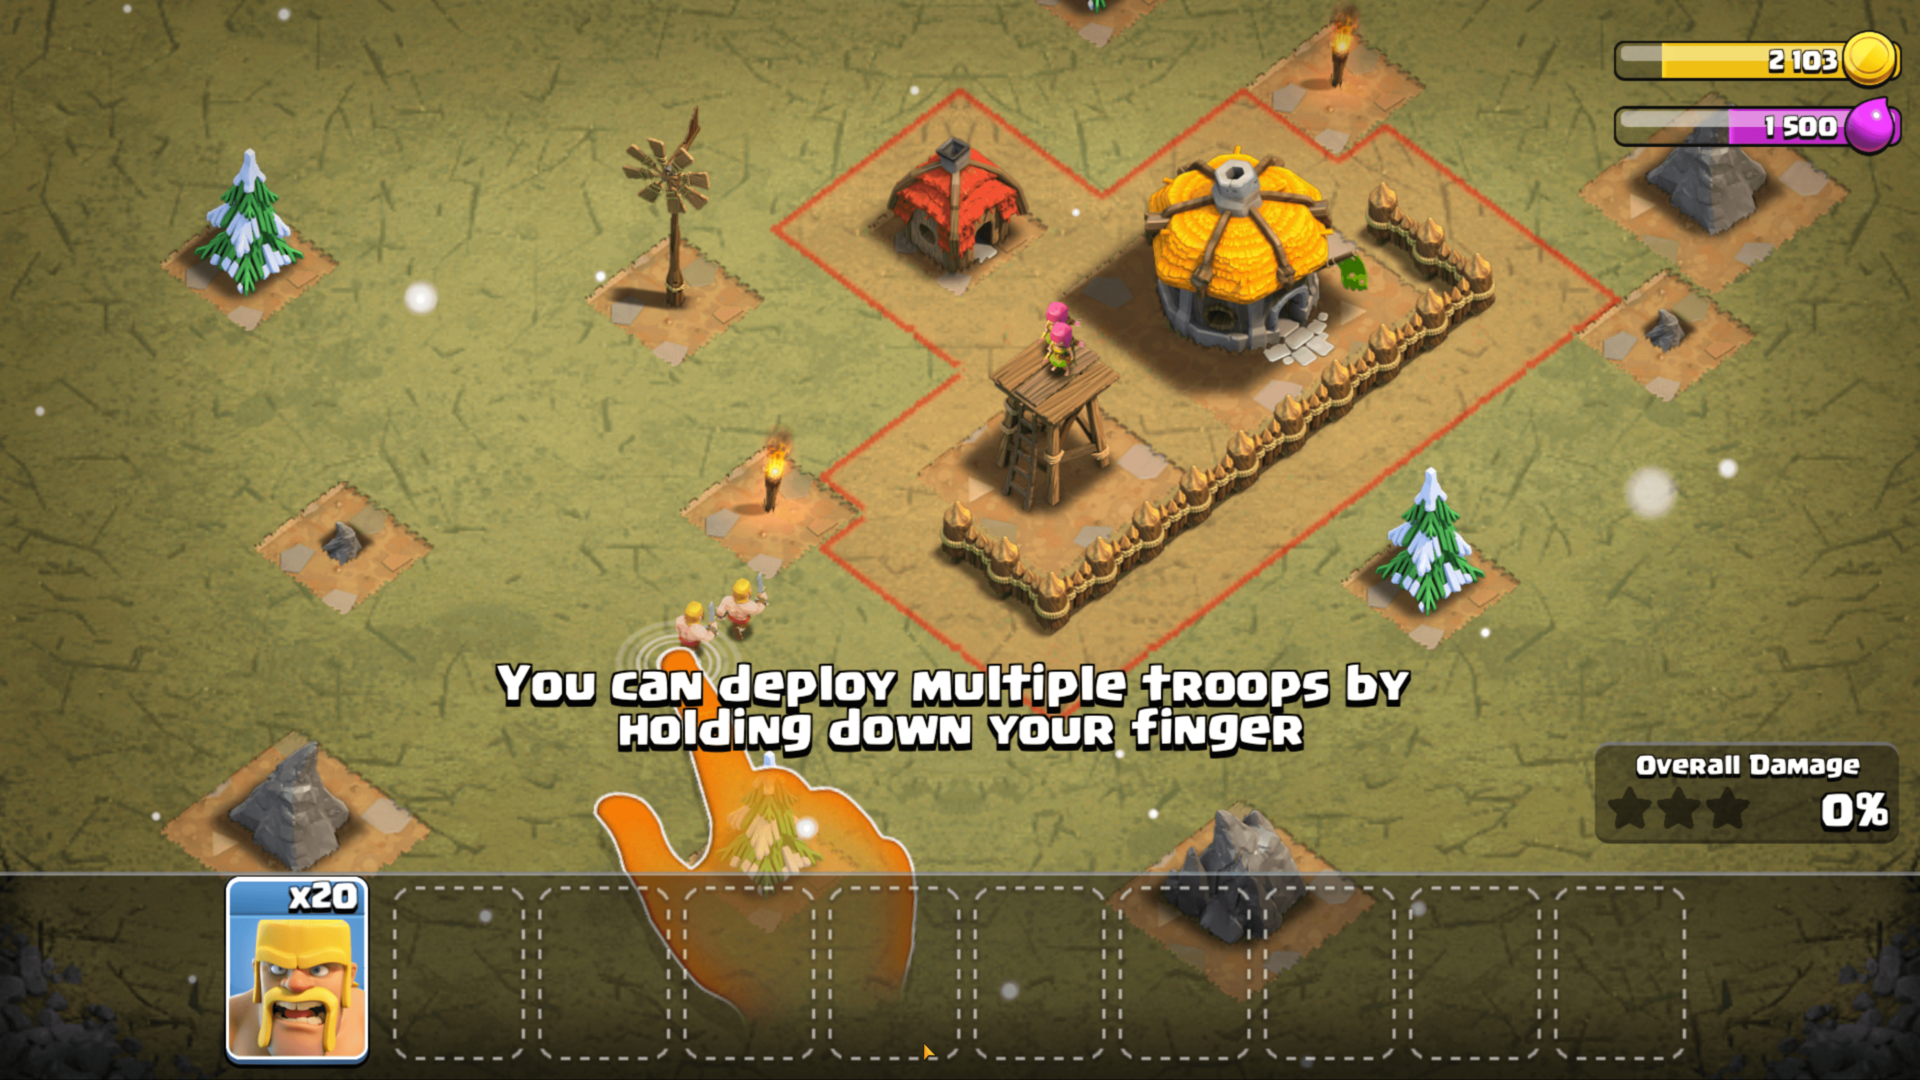 Deploy troops screenshot of Clash of Clans video game interface.